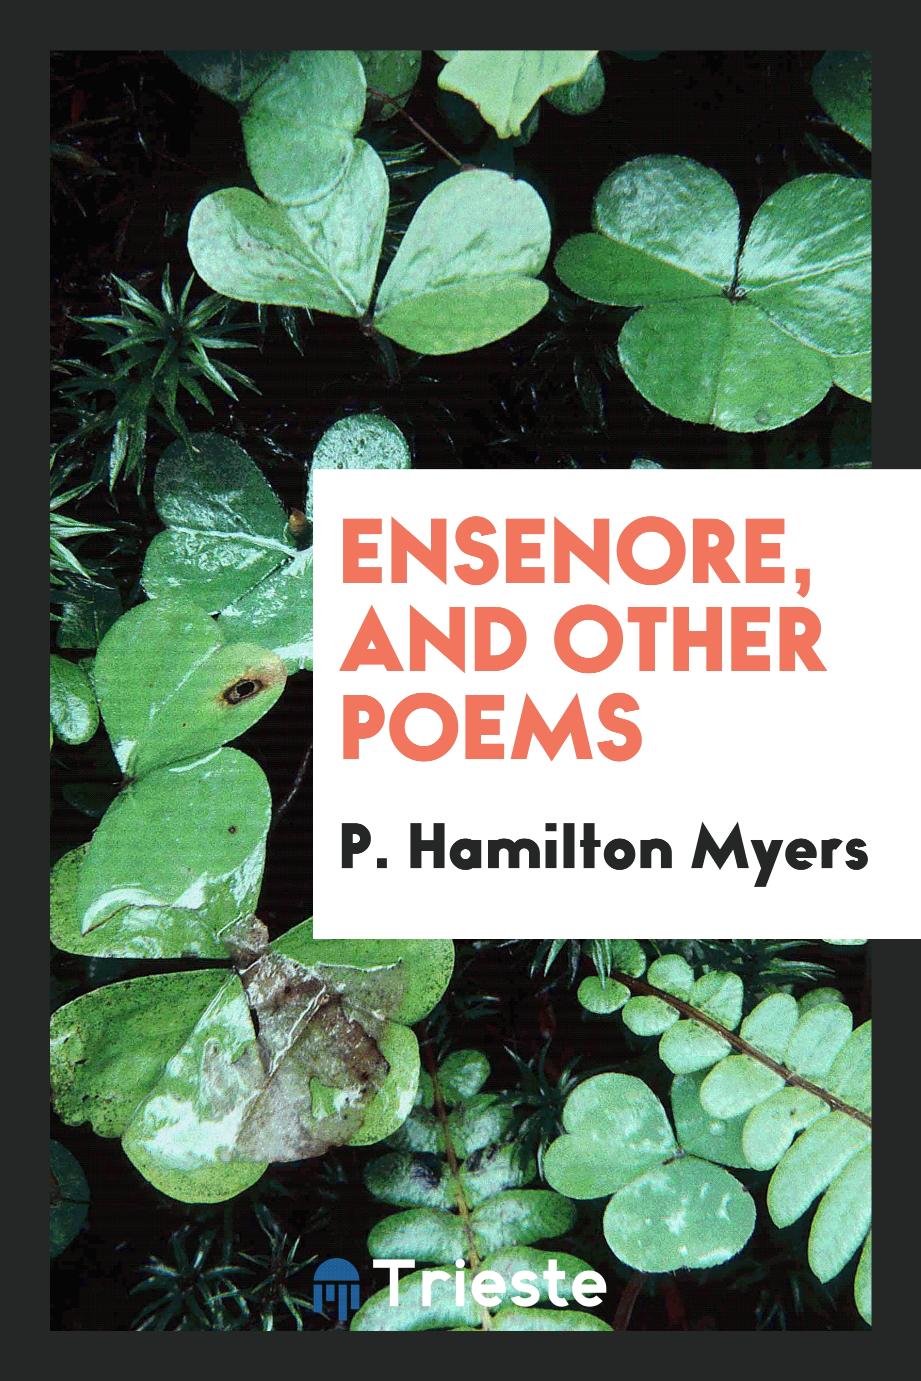 Ensenore, and other poems